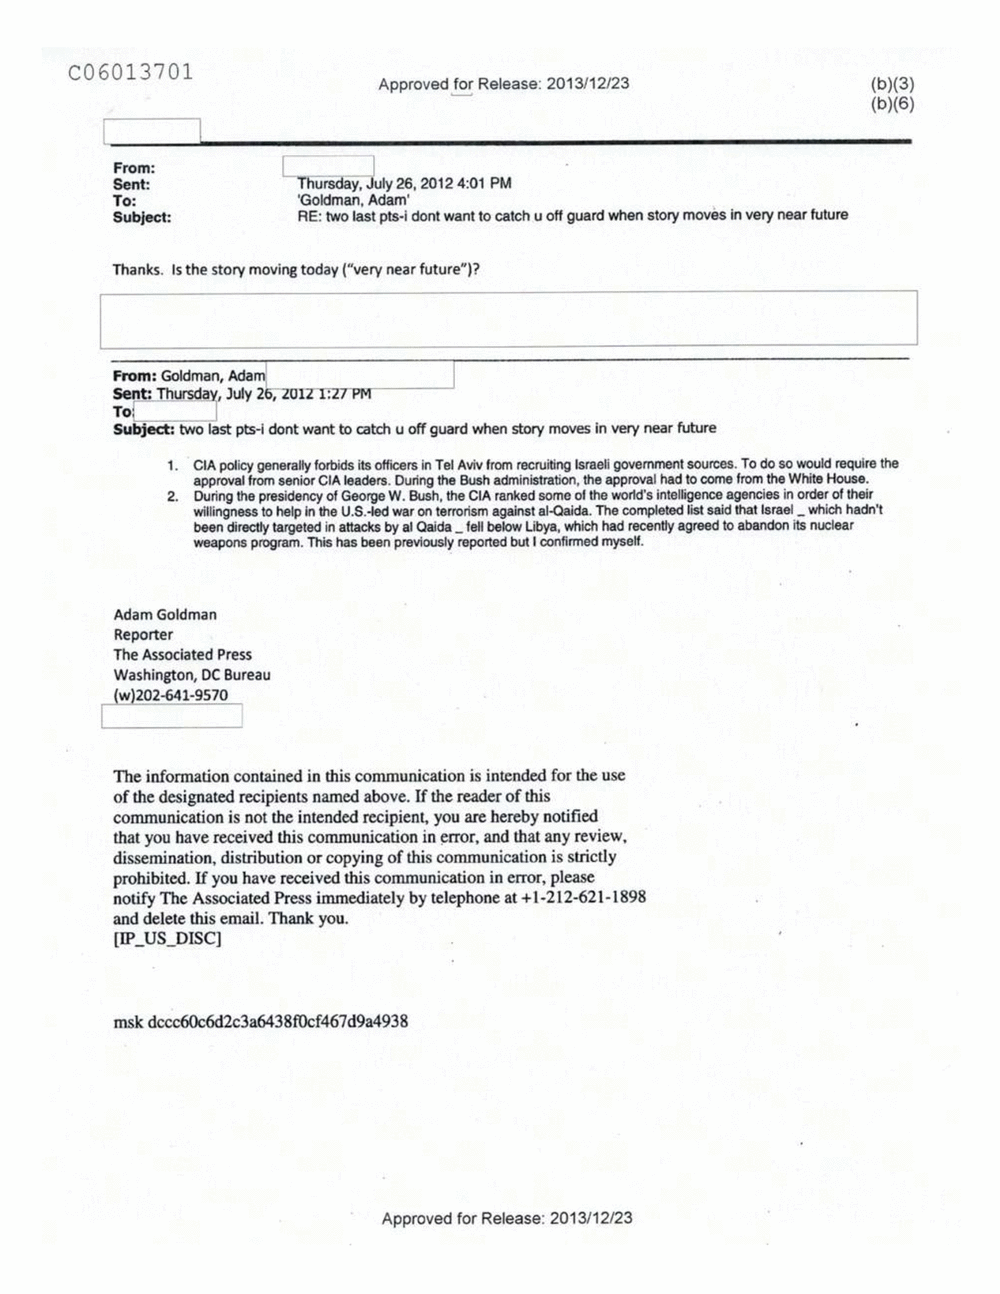 Page 561 from Email Correspondence Between Reporters and CIA Flacks